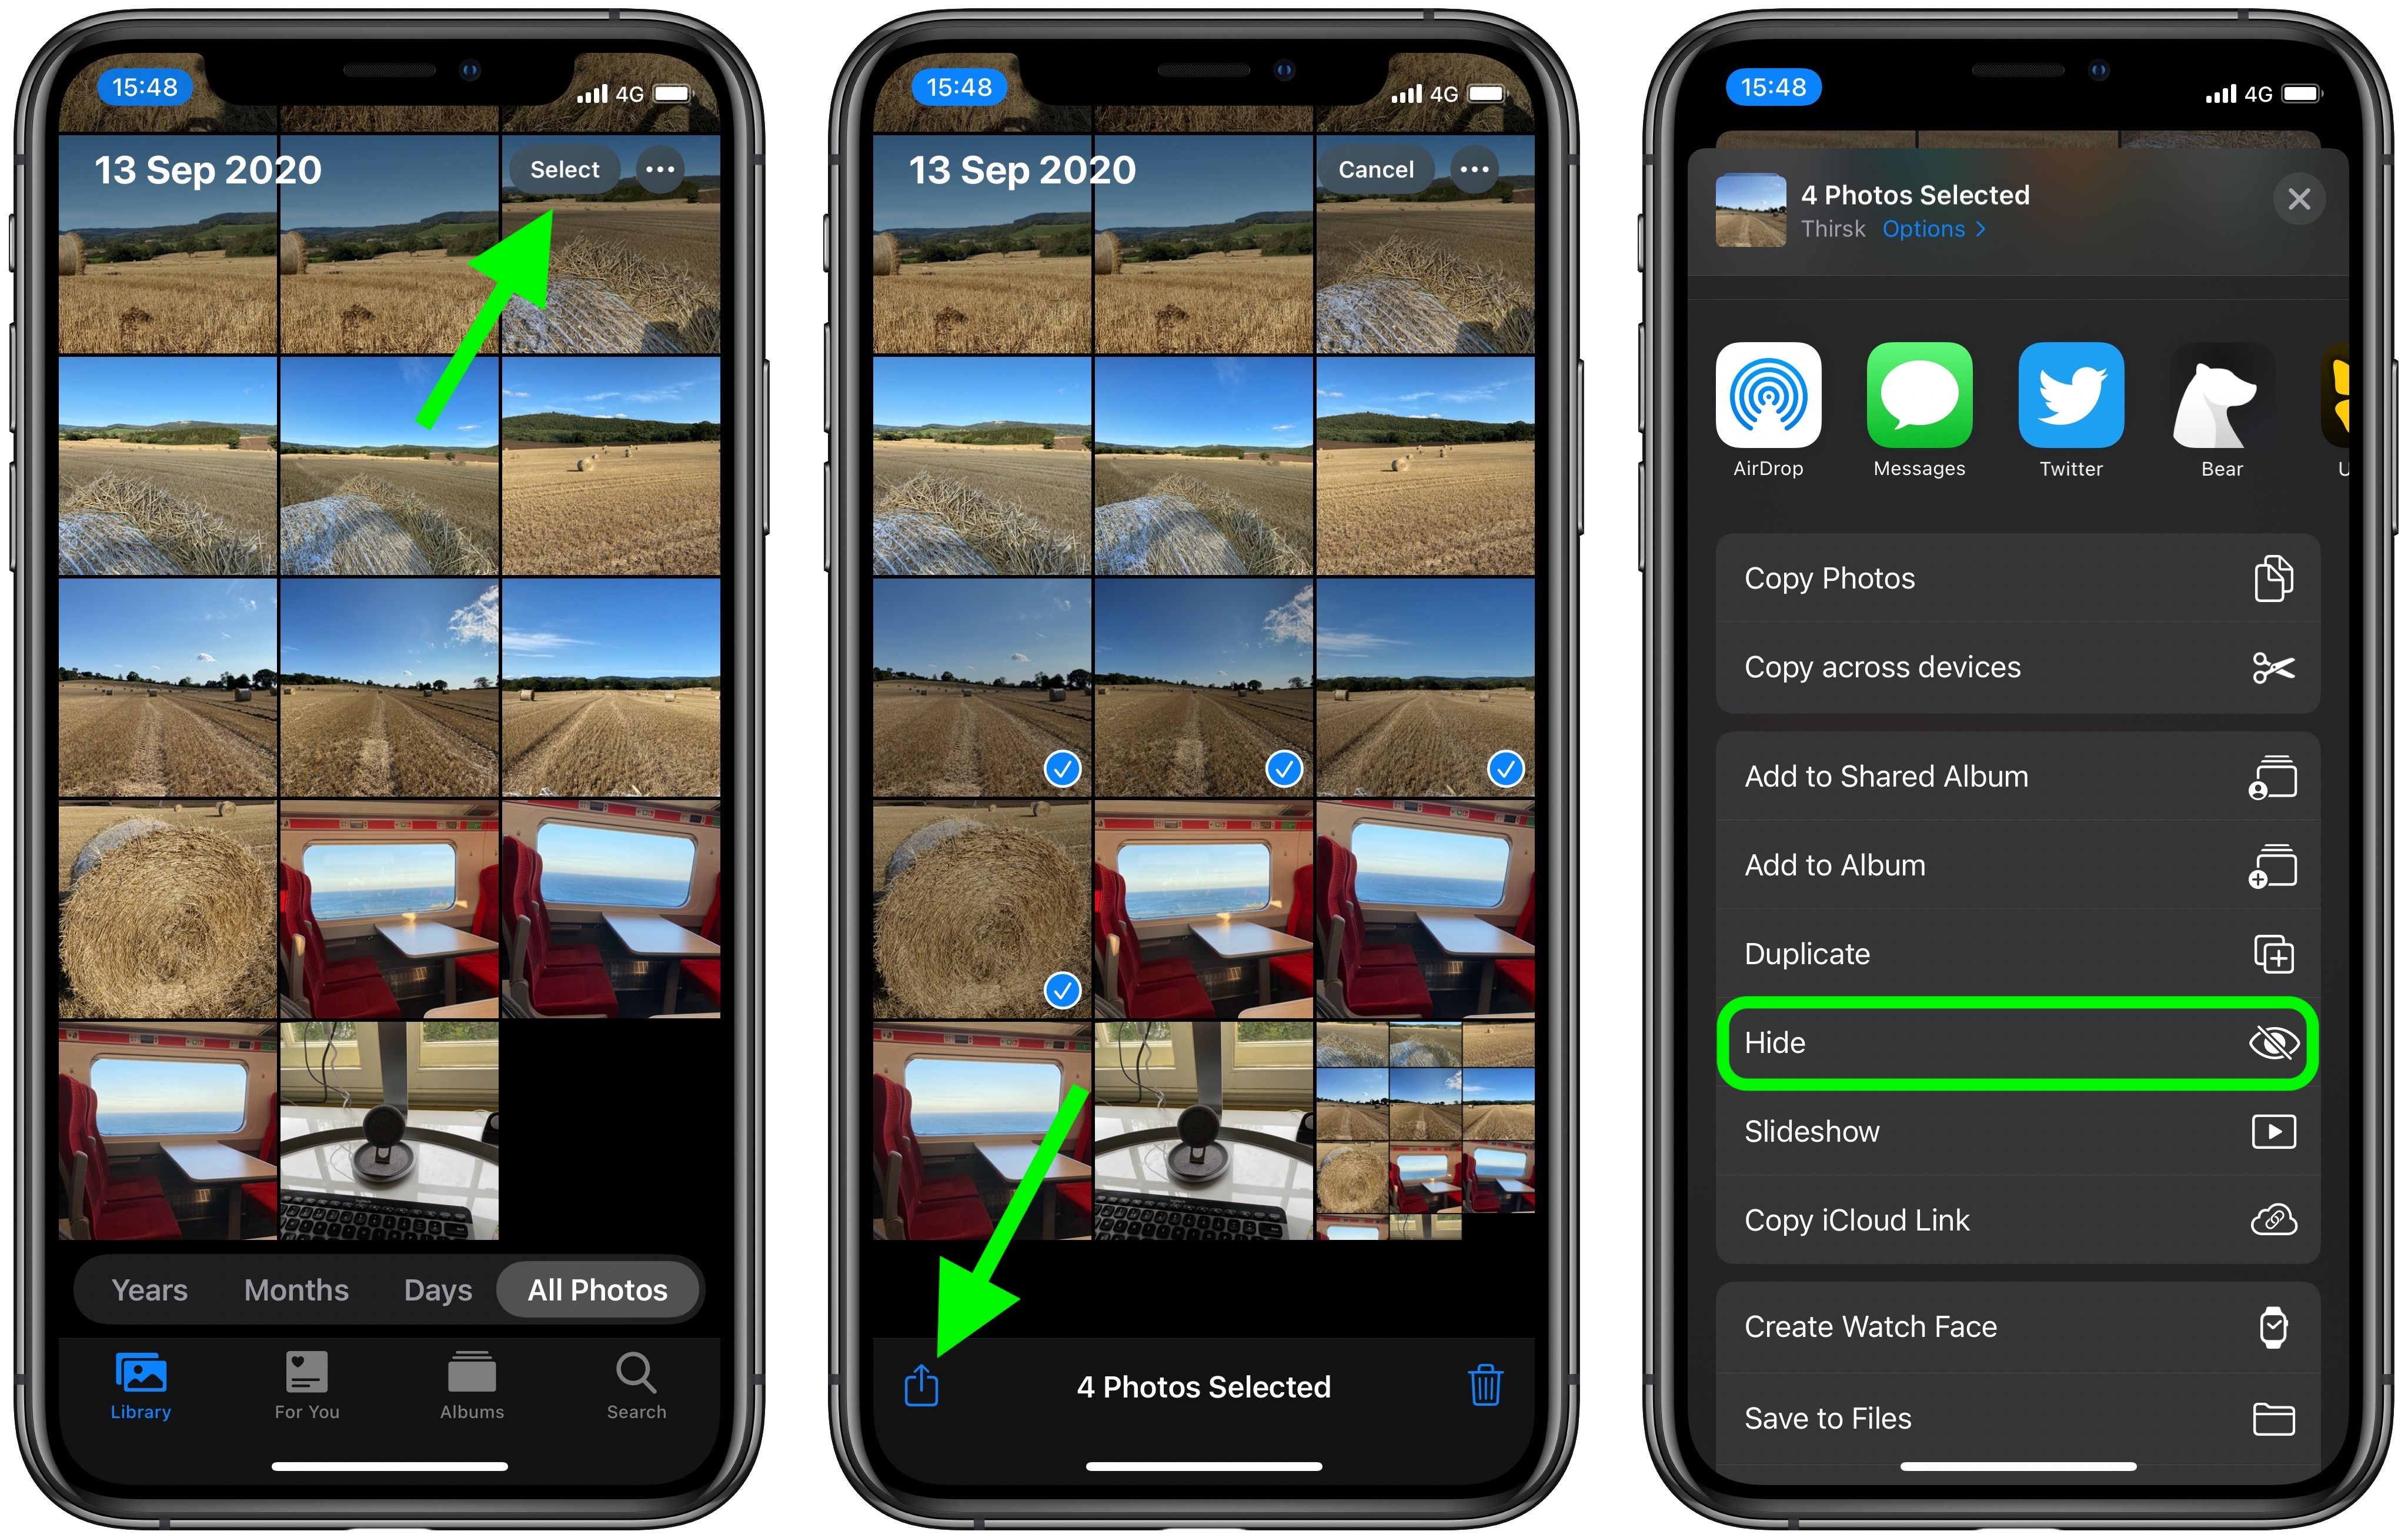 How To Hide Photos On IPhone